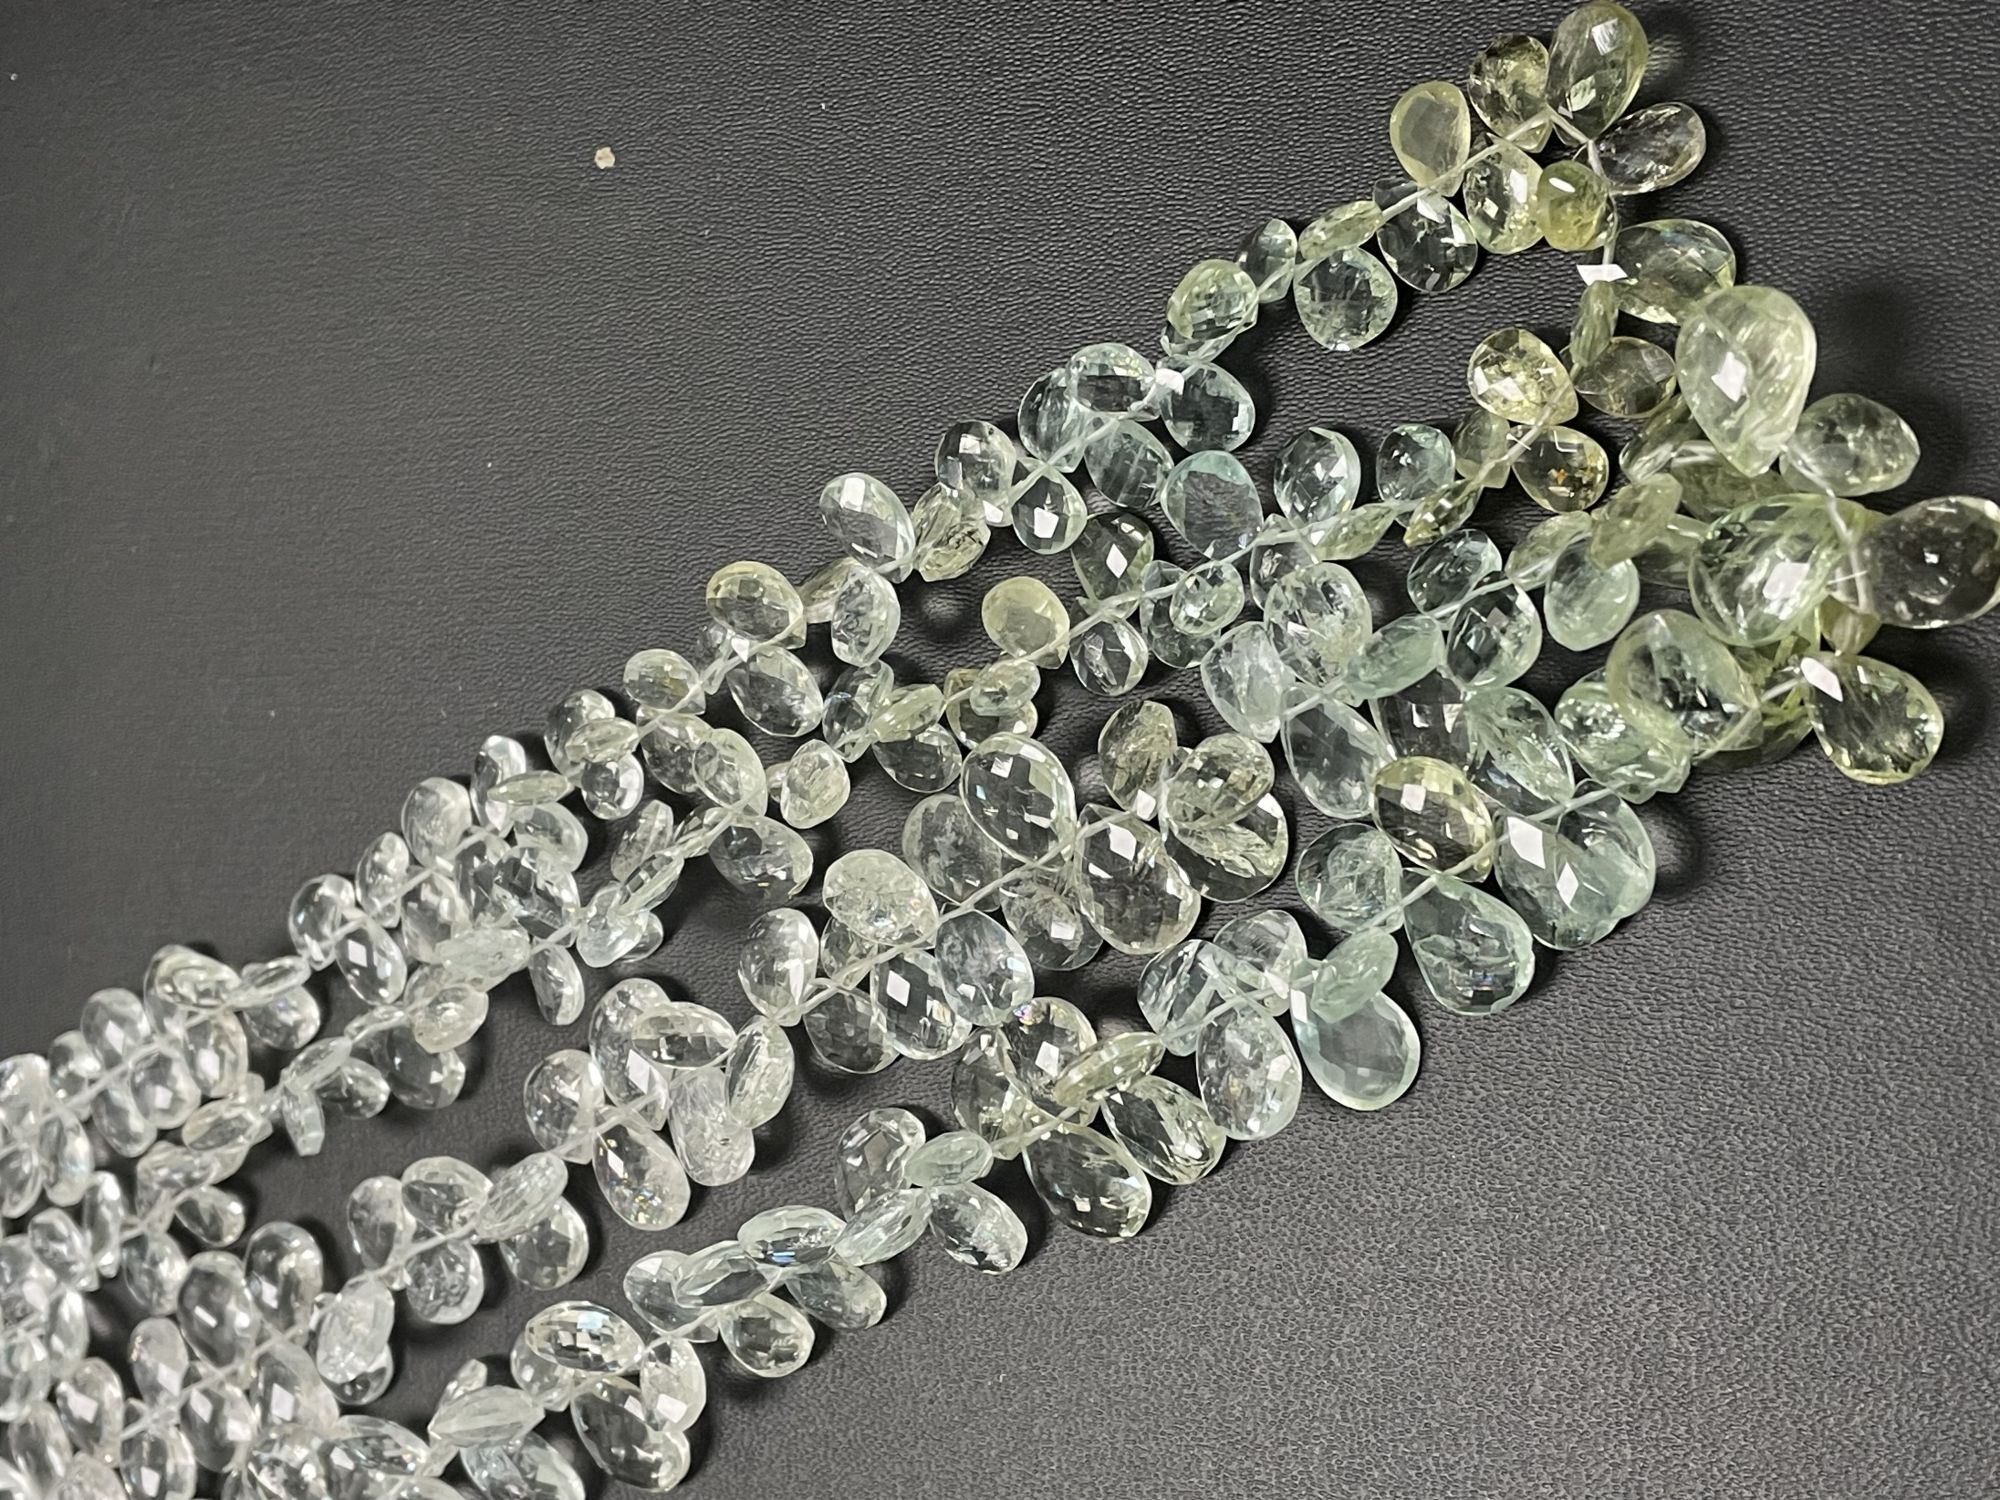 Shaded Green Aquamarine Pear Faceted